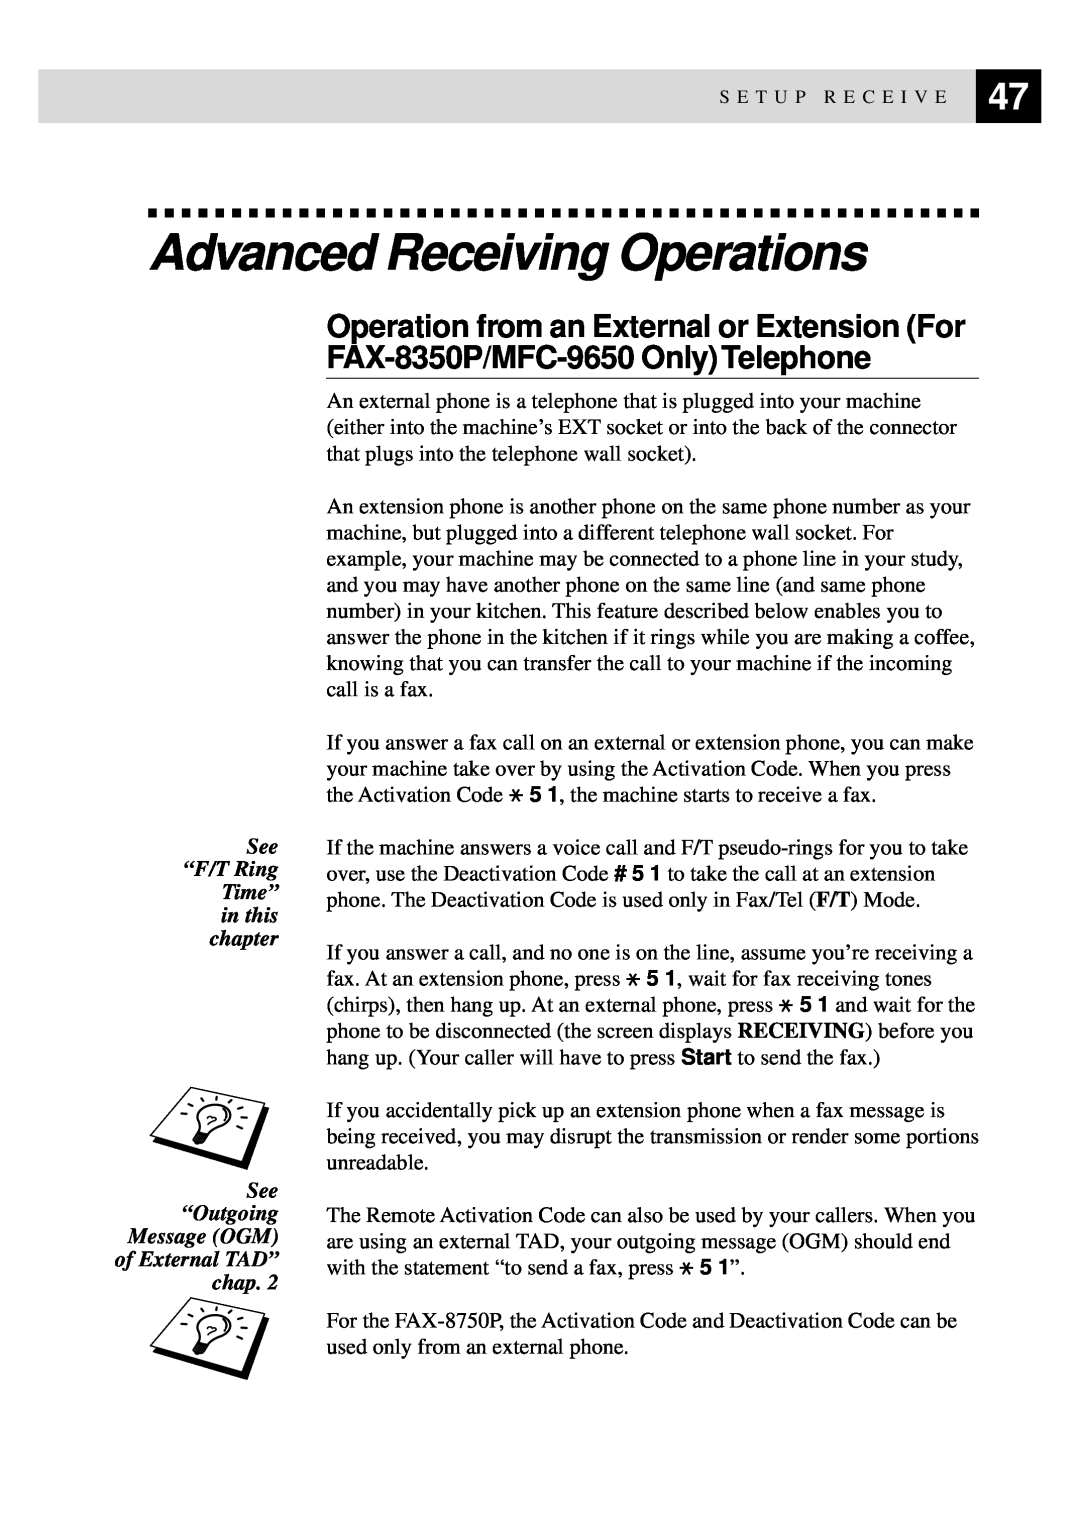 Brother MFC-9650, FAX-8350P owner manual Advanced Receiving Operations, See “F/T Ring Time” in this chapter 